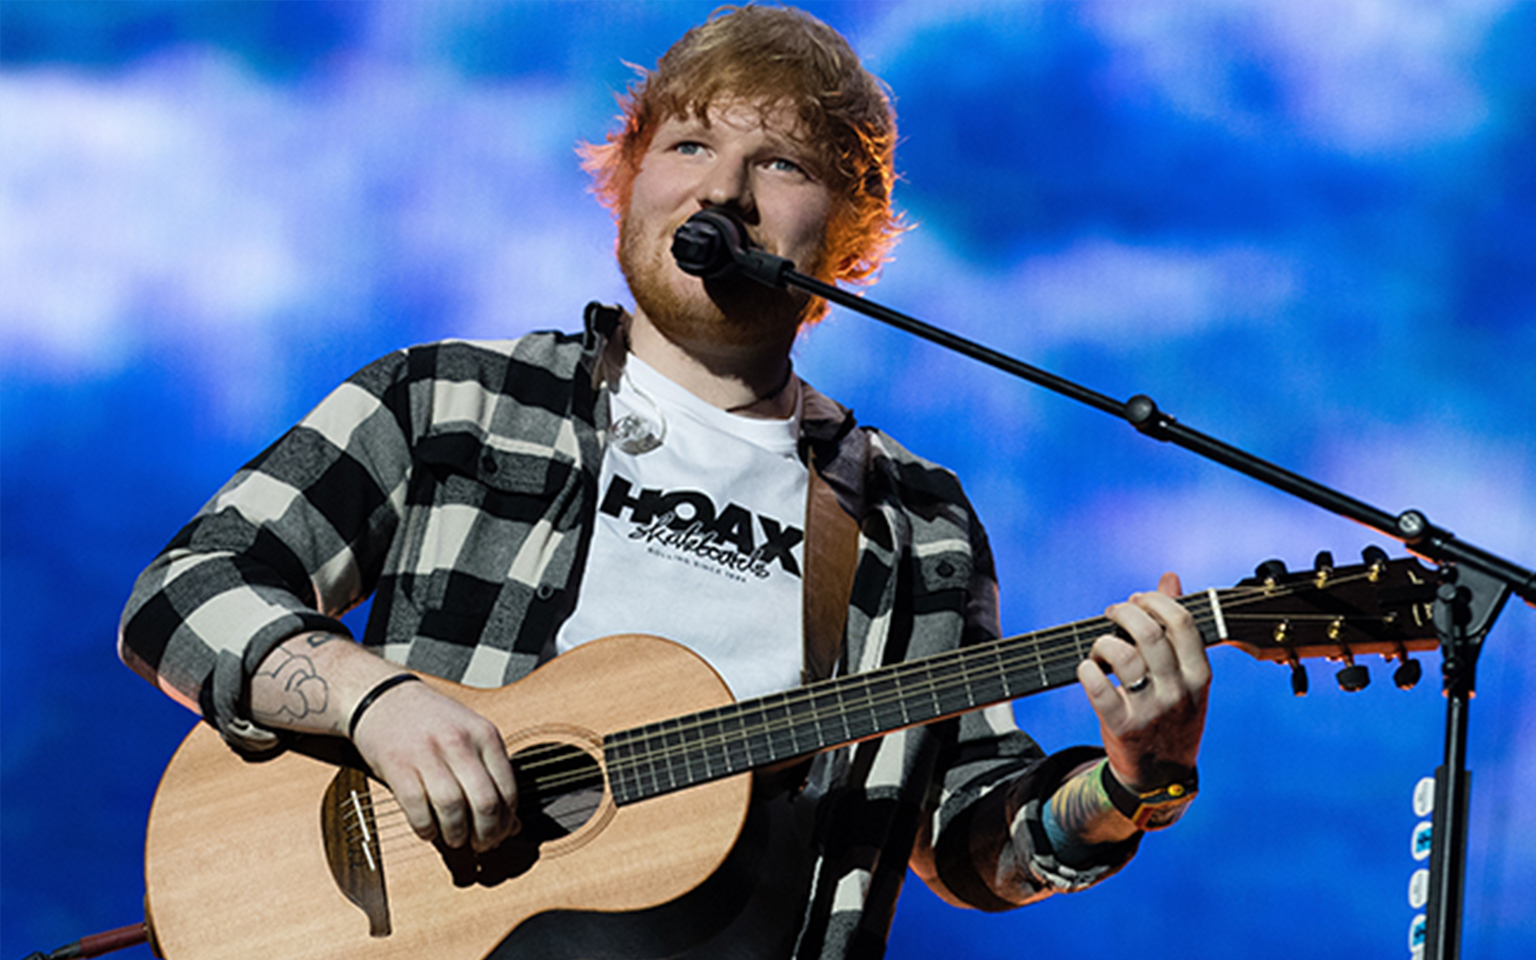 Text to WIN for your chance to meet Ed Sheeran